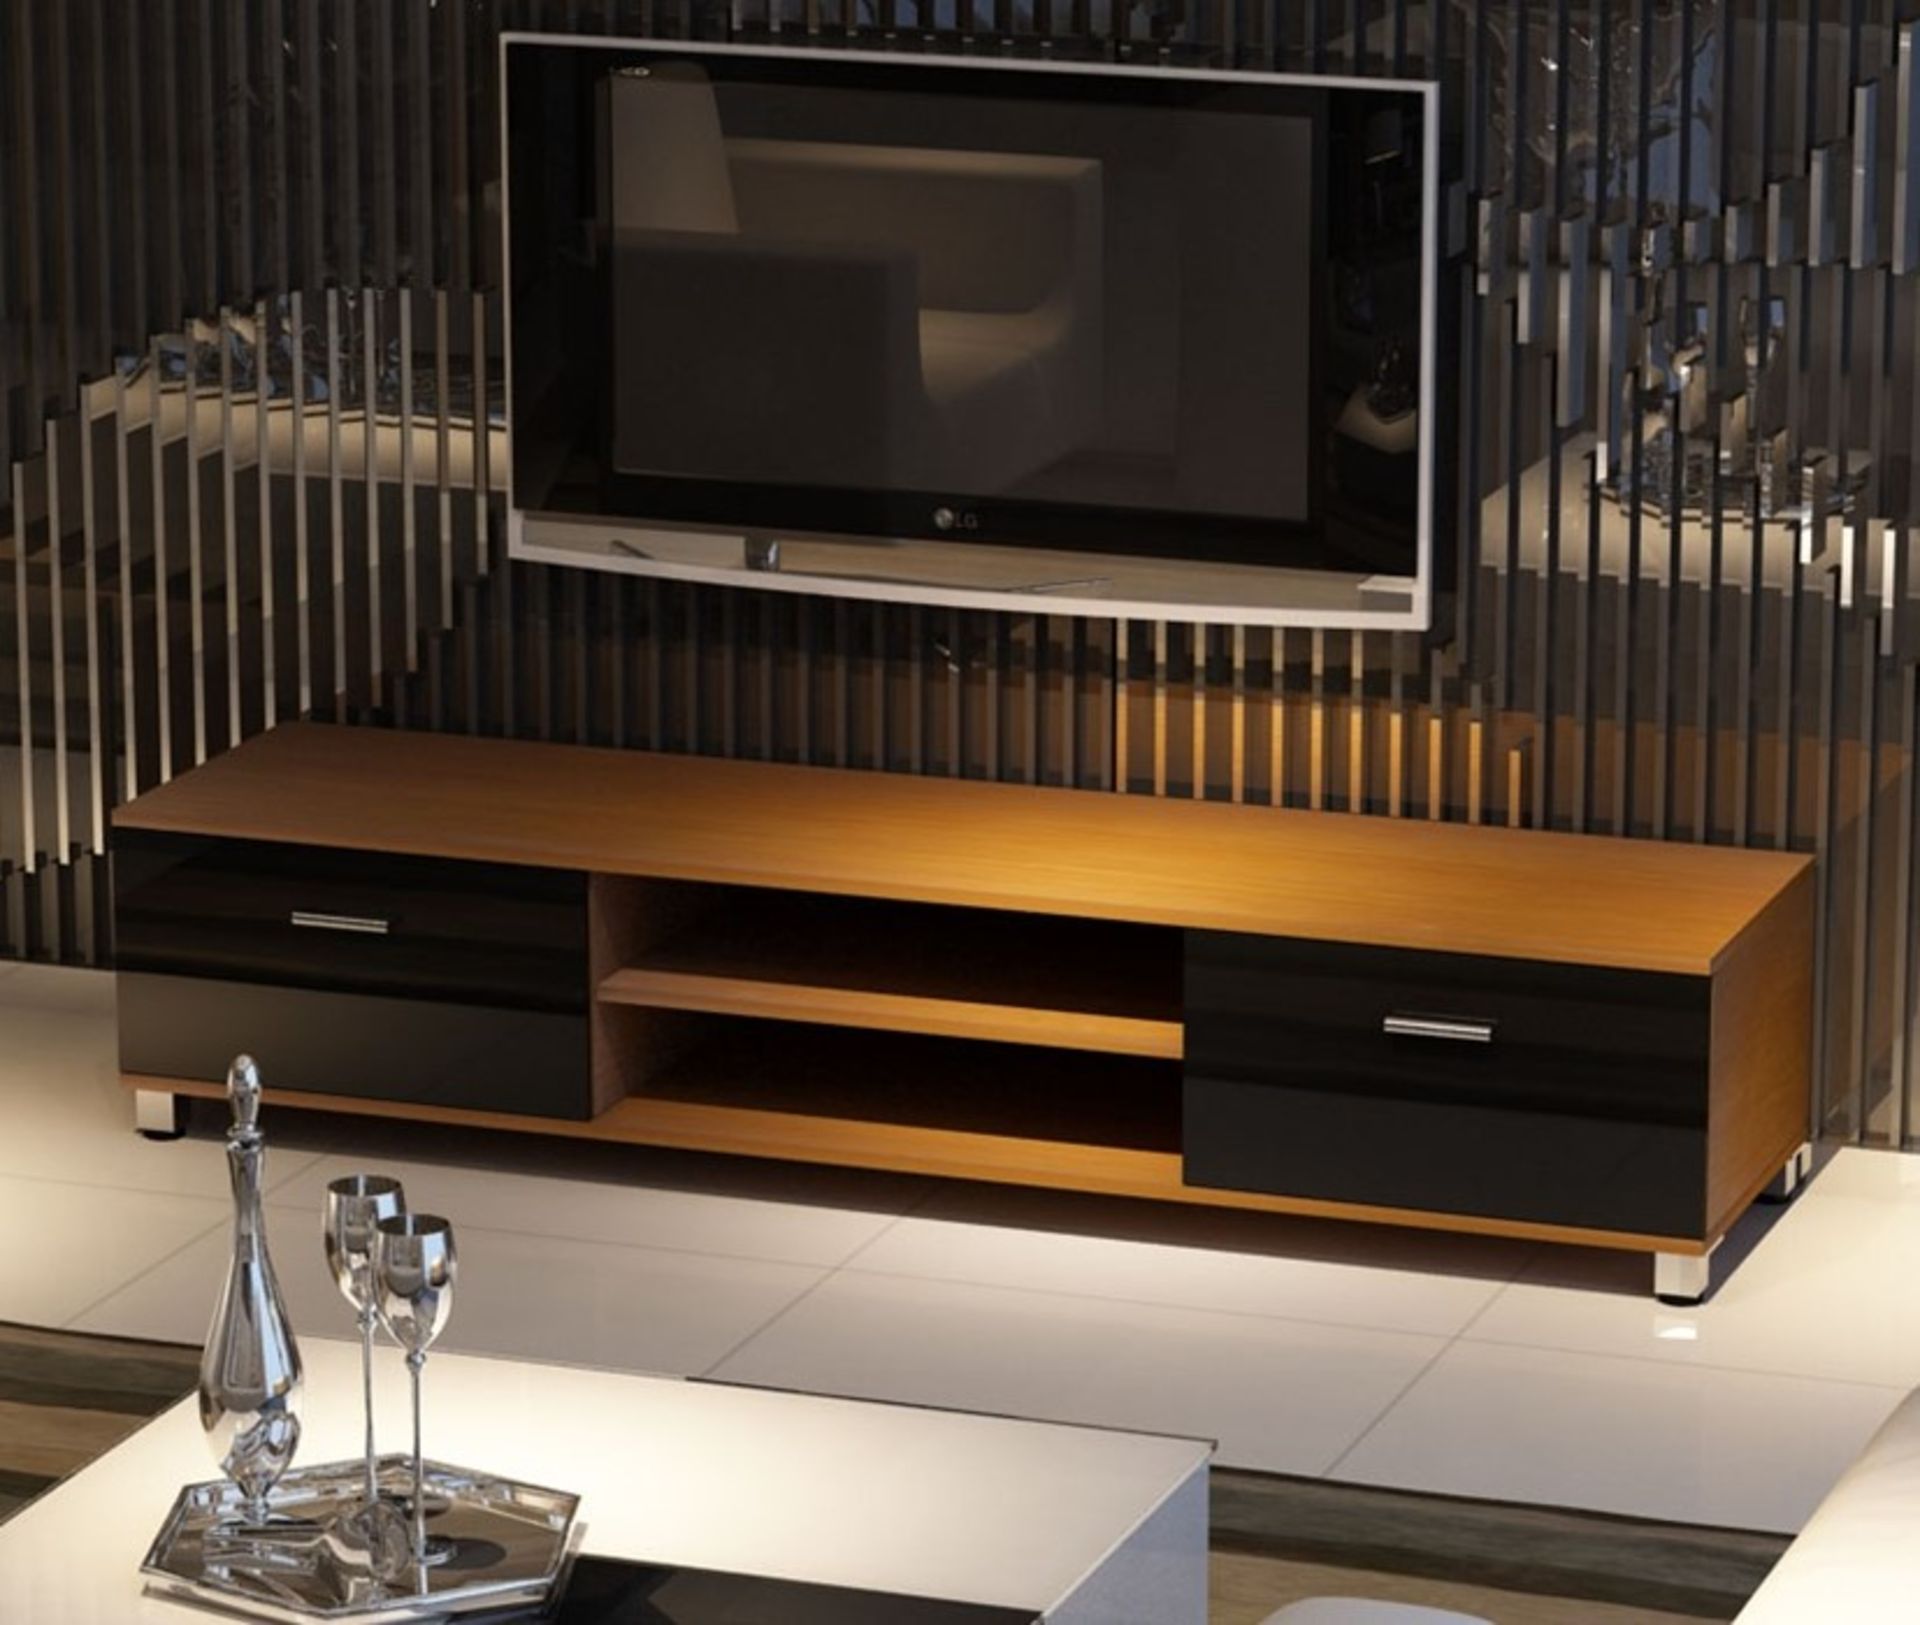 1 BOXED WOODEN TV UNIT IN OAK + WHITE - TVS351 / PICTURE AS REFERNCE, COLOUR WILL VARY FROM